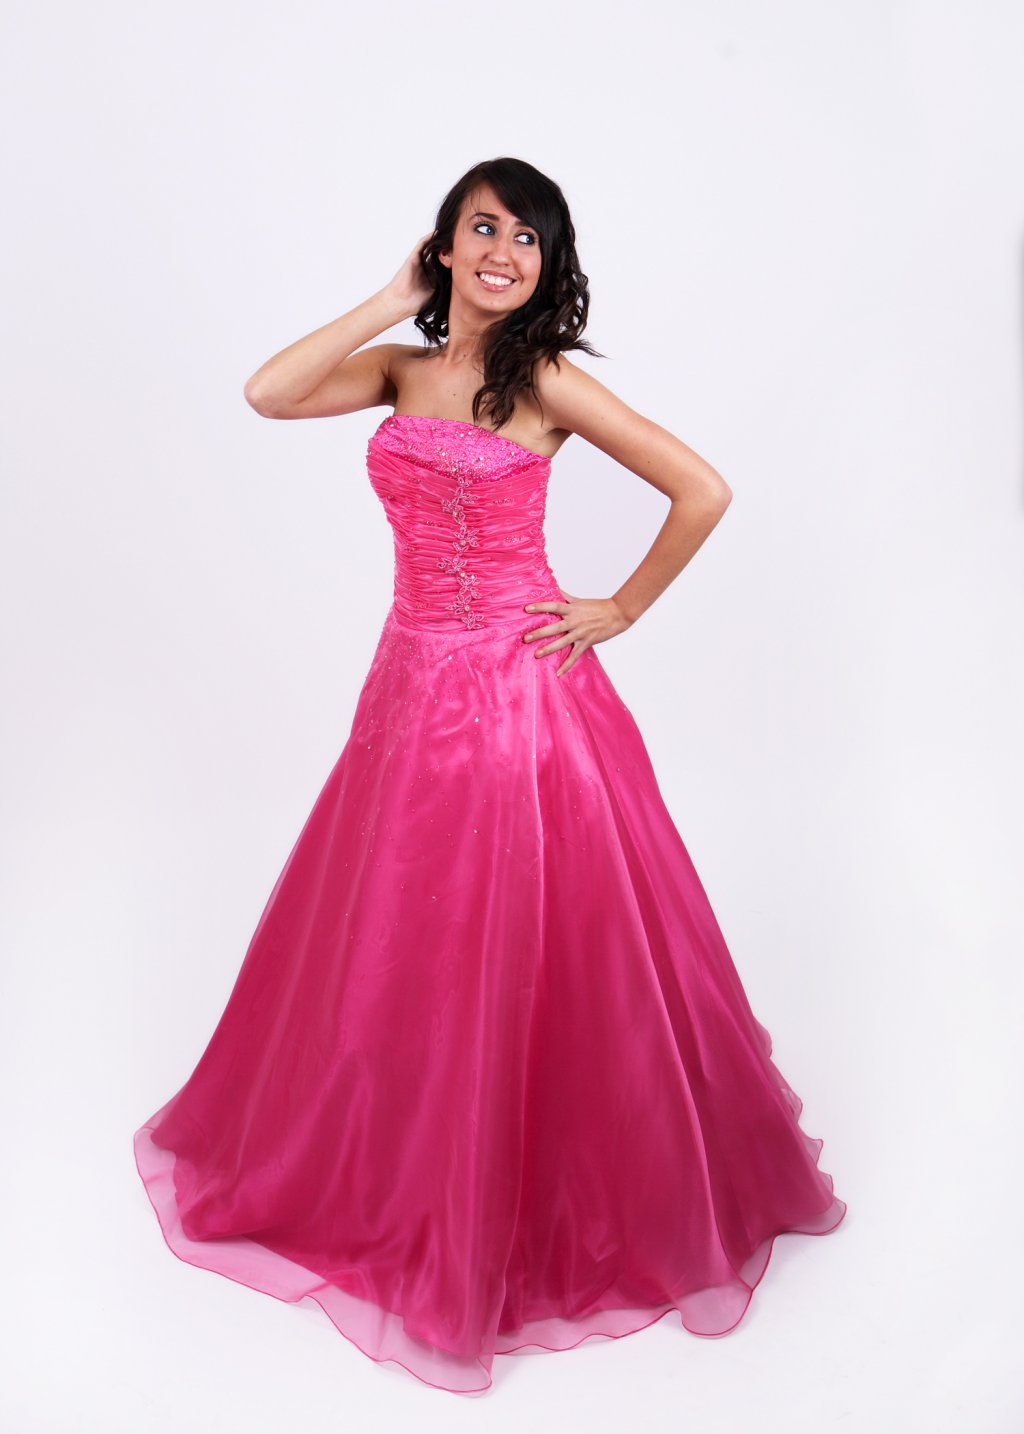 pink prom dress | Prom Dresses 2012 and 2012 Formal Gowns